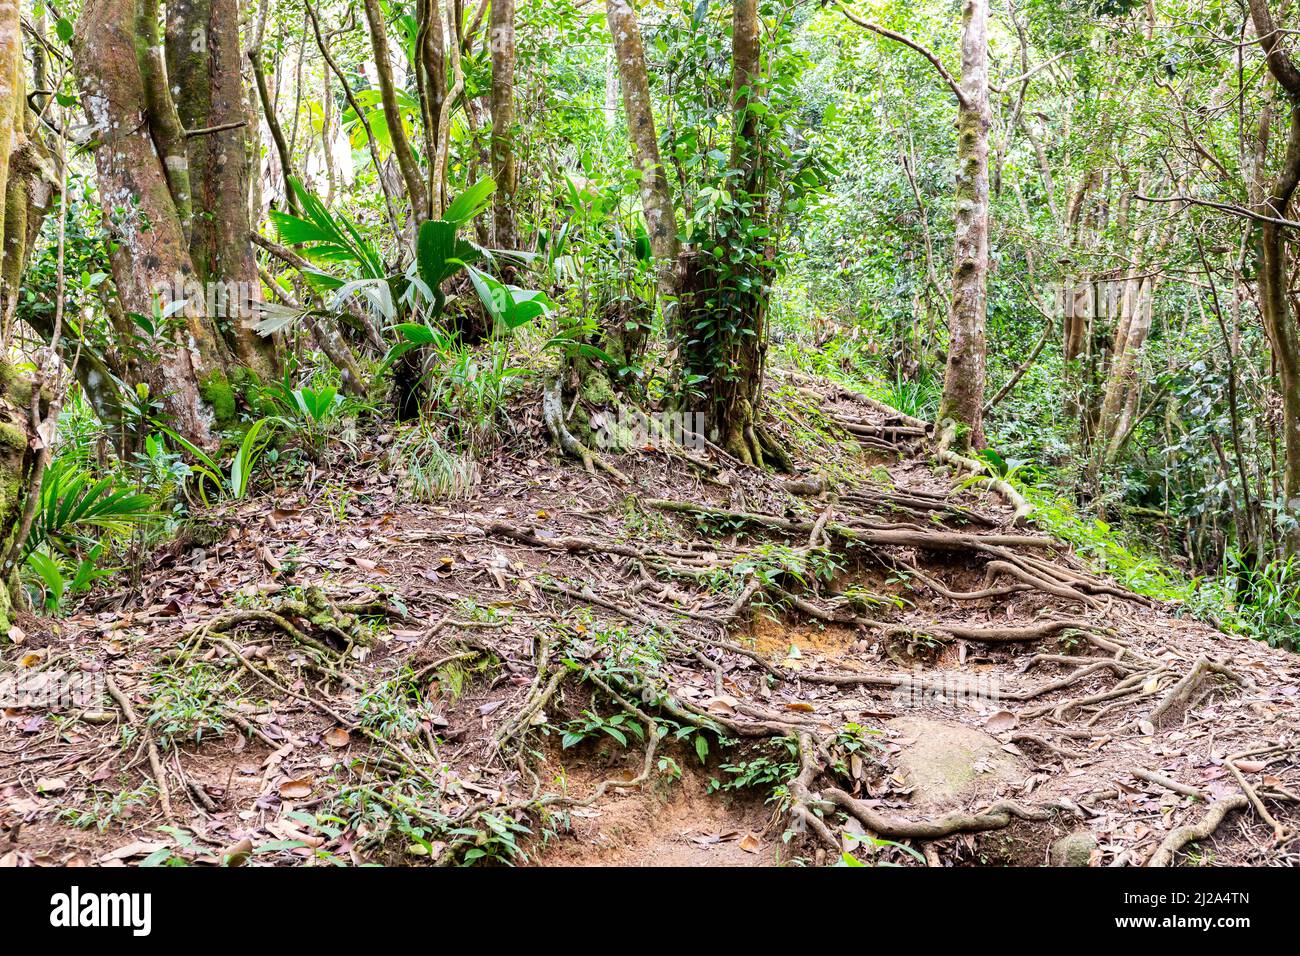 Morne Blanc nature hiking trail with narrow path through lush tropical forest covered with roots network, in Morne Seychelles National Park, Mahe. Stock Photo